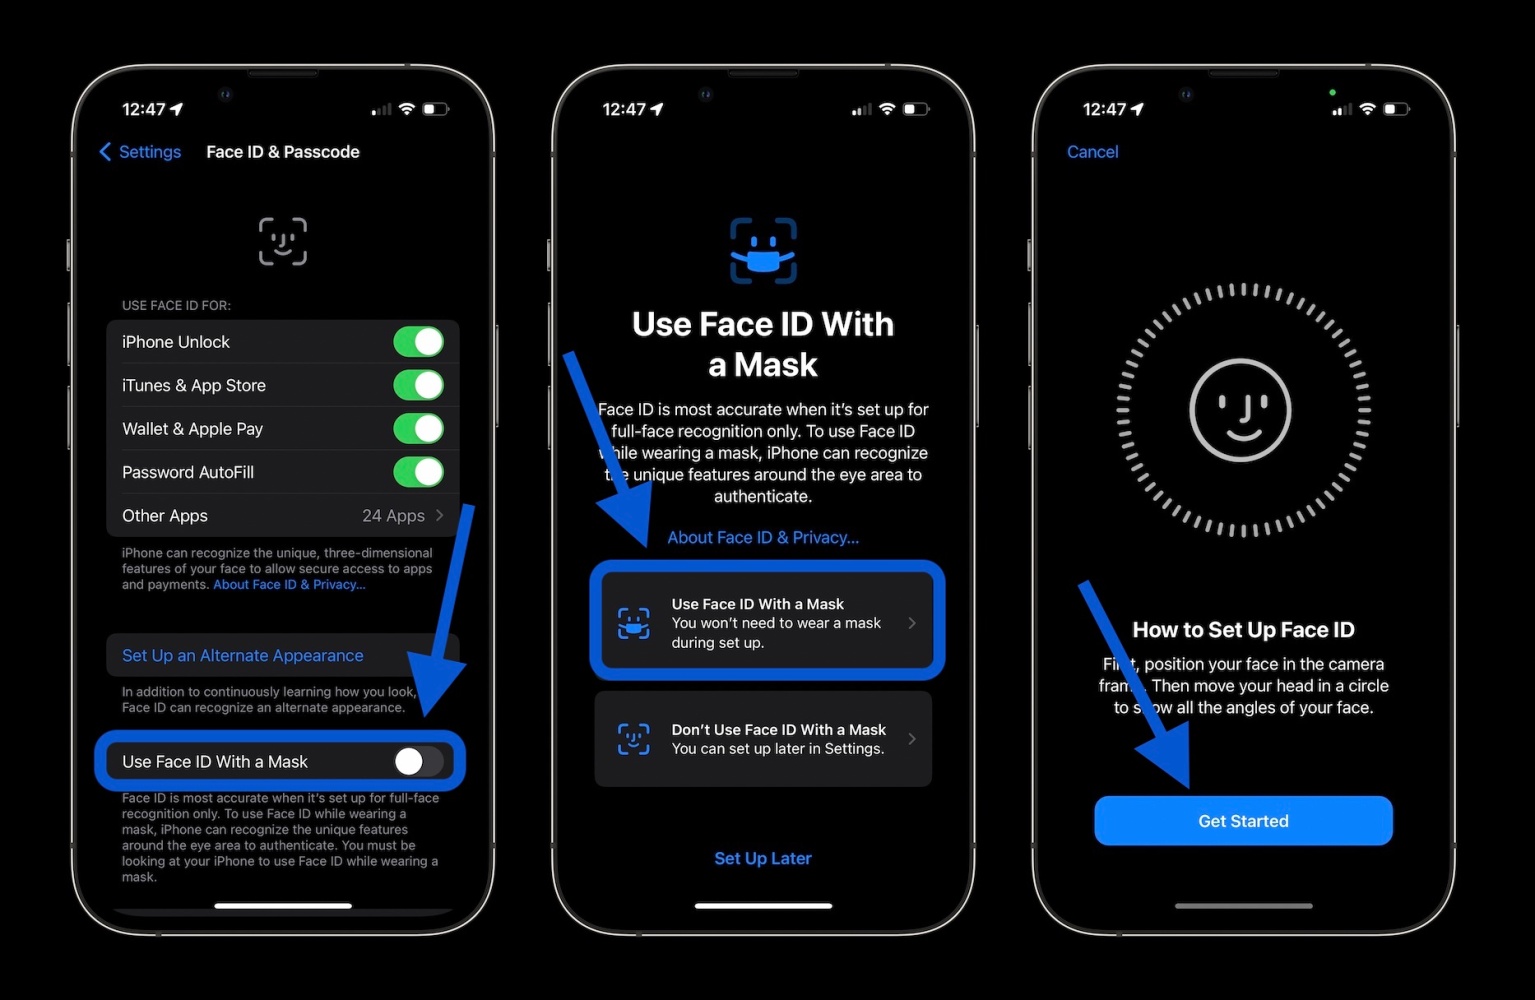 how-to-use-face-id-with-mask-iphone-ios-15-4-walkthrough-1